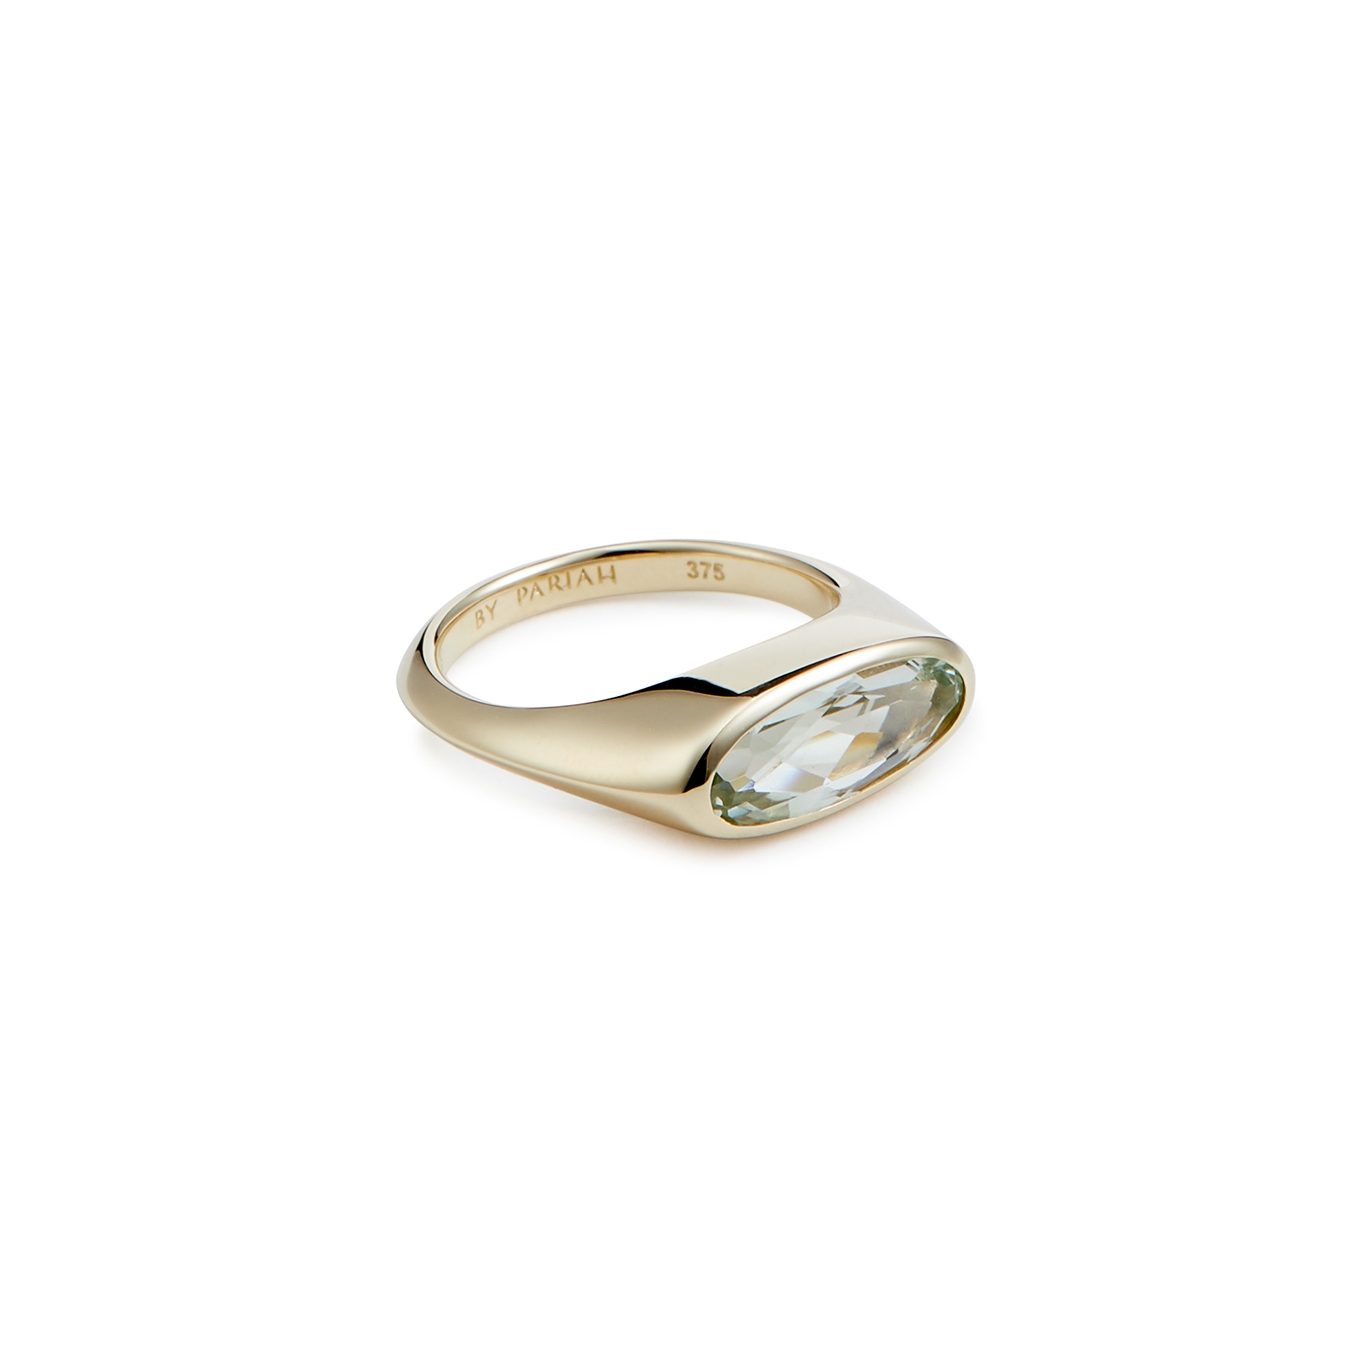 By Pariah The Orbit Embellished 9kt Gold Pinky Ring, Ring, Light Green - Black - 4